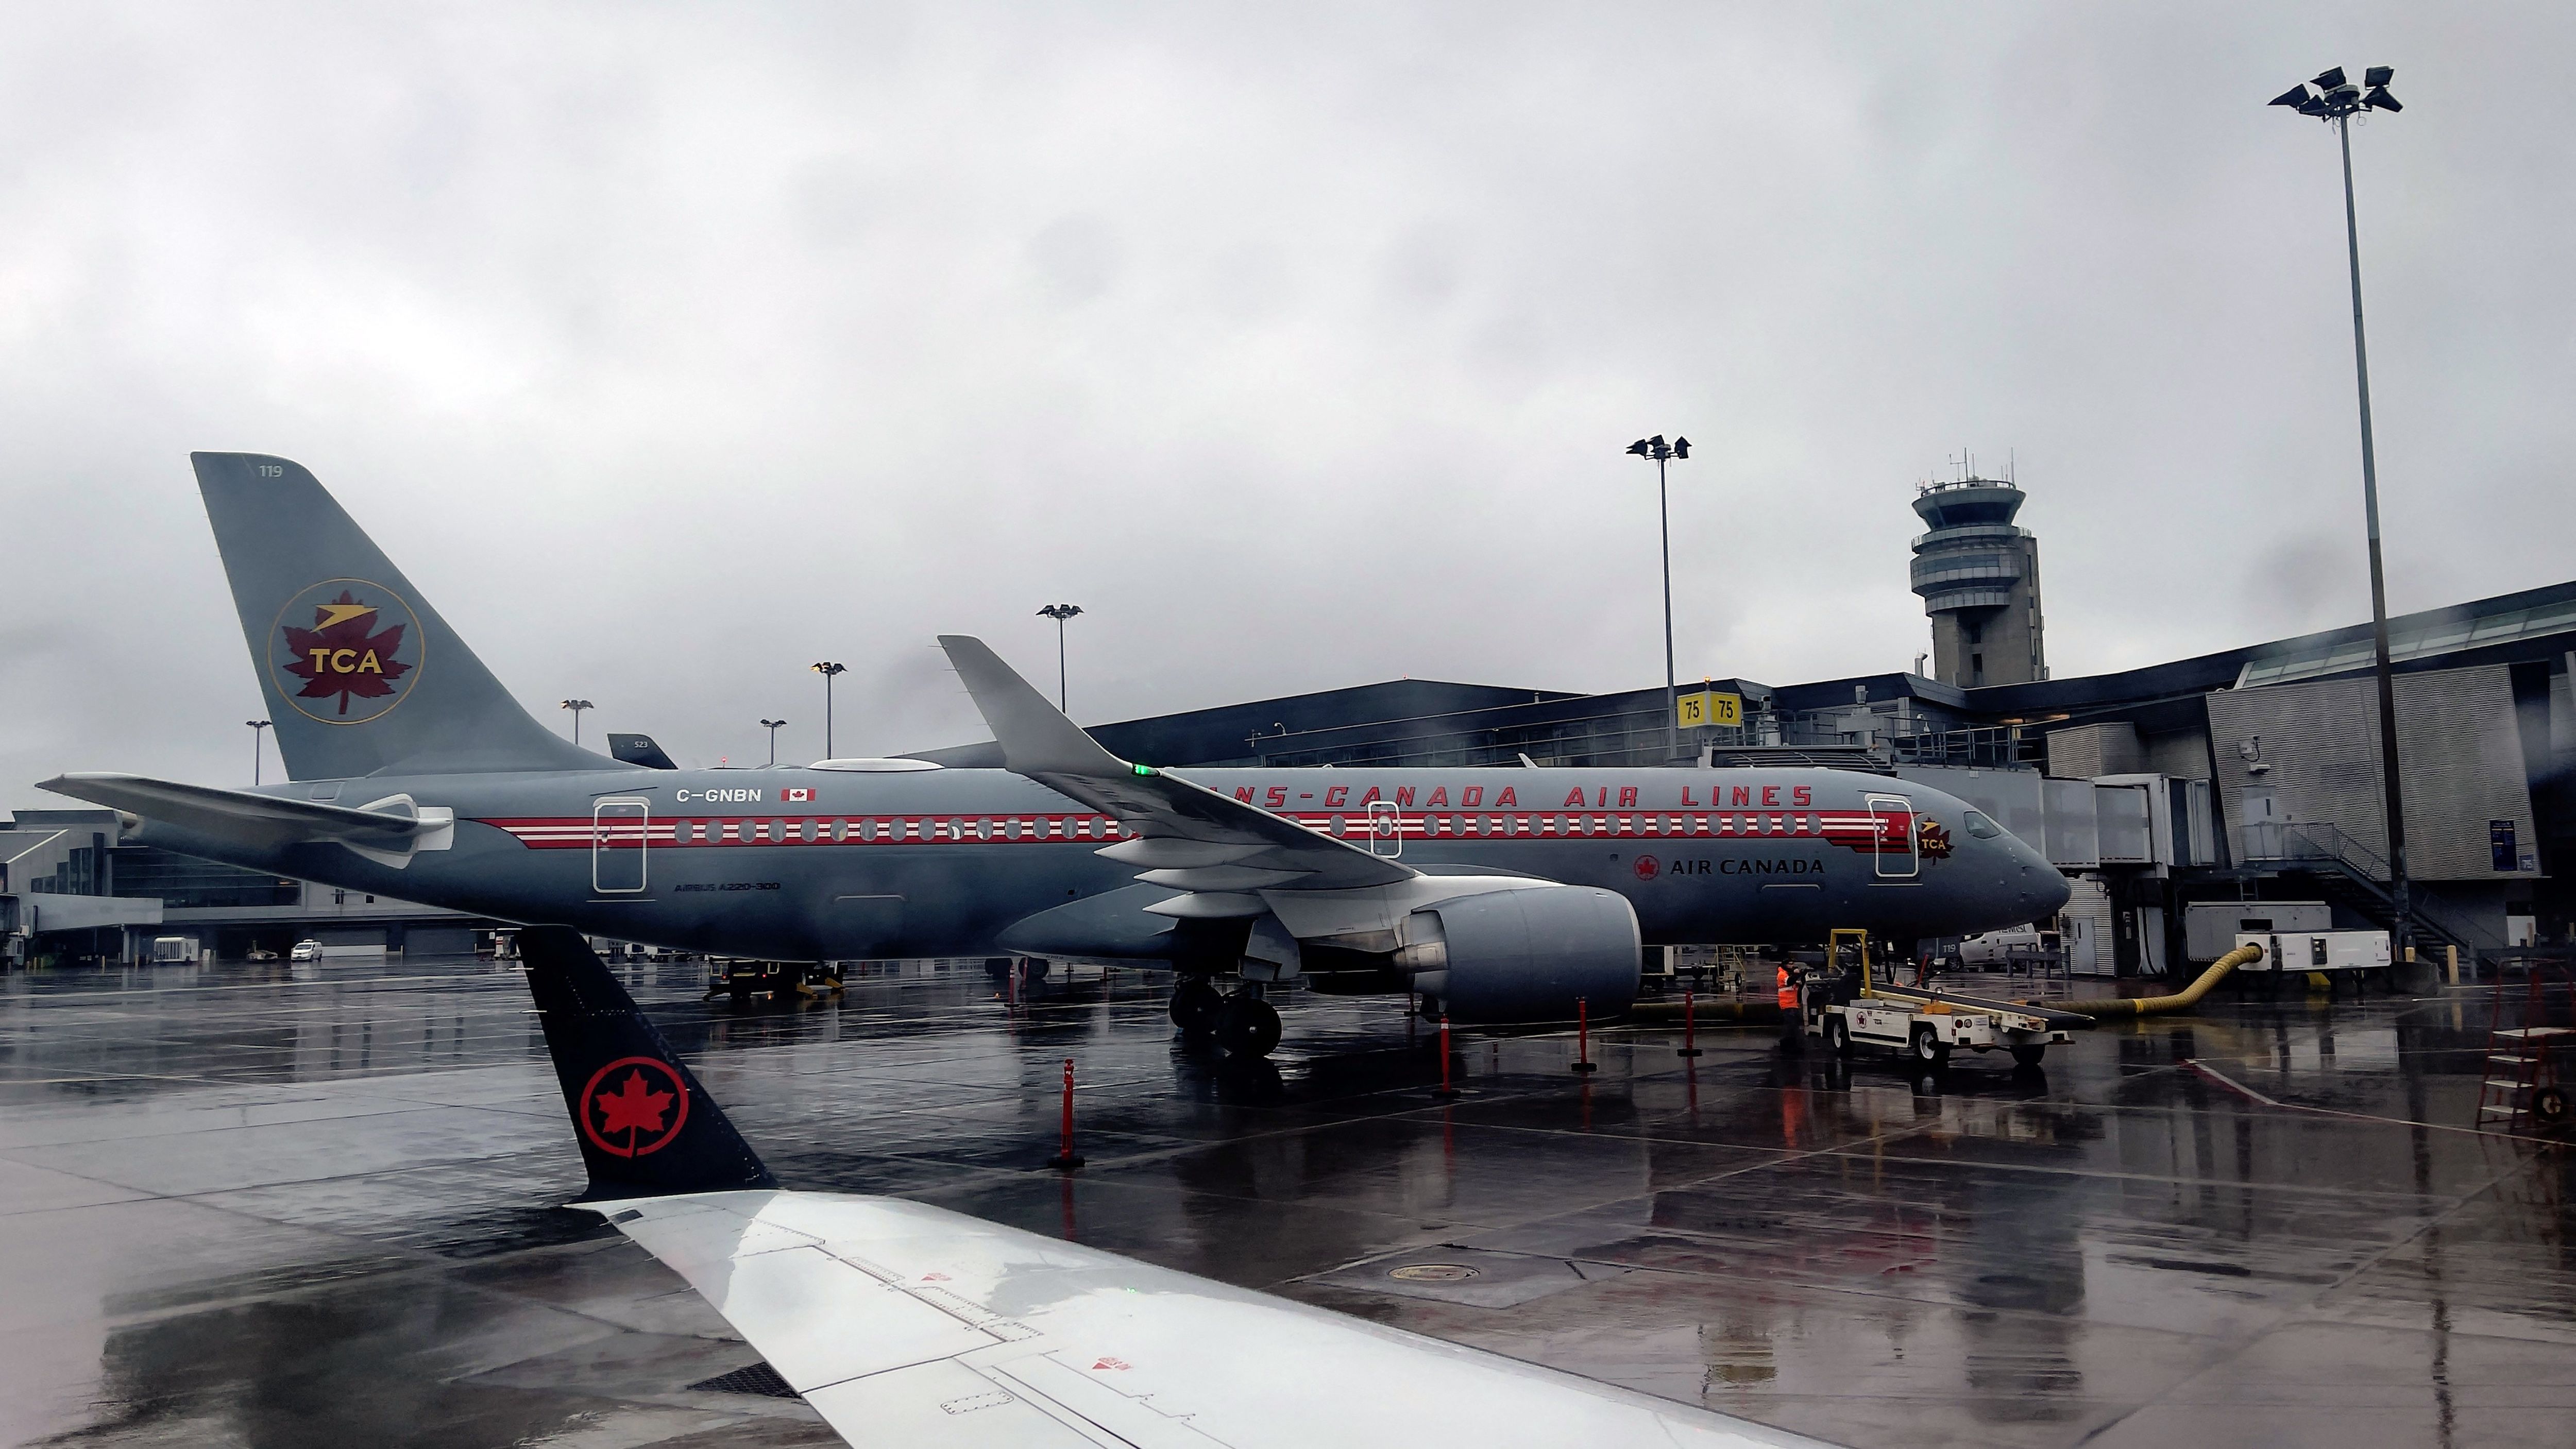 Air Canada plane in retro livery parked at gate at Montreal airport 